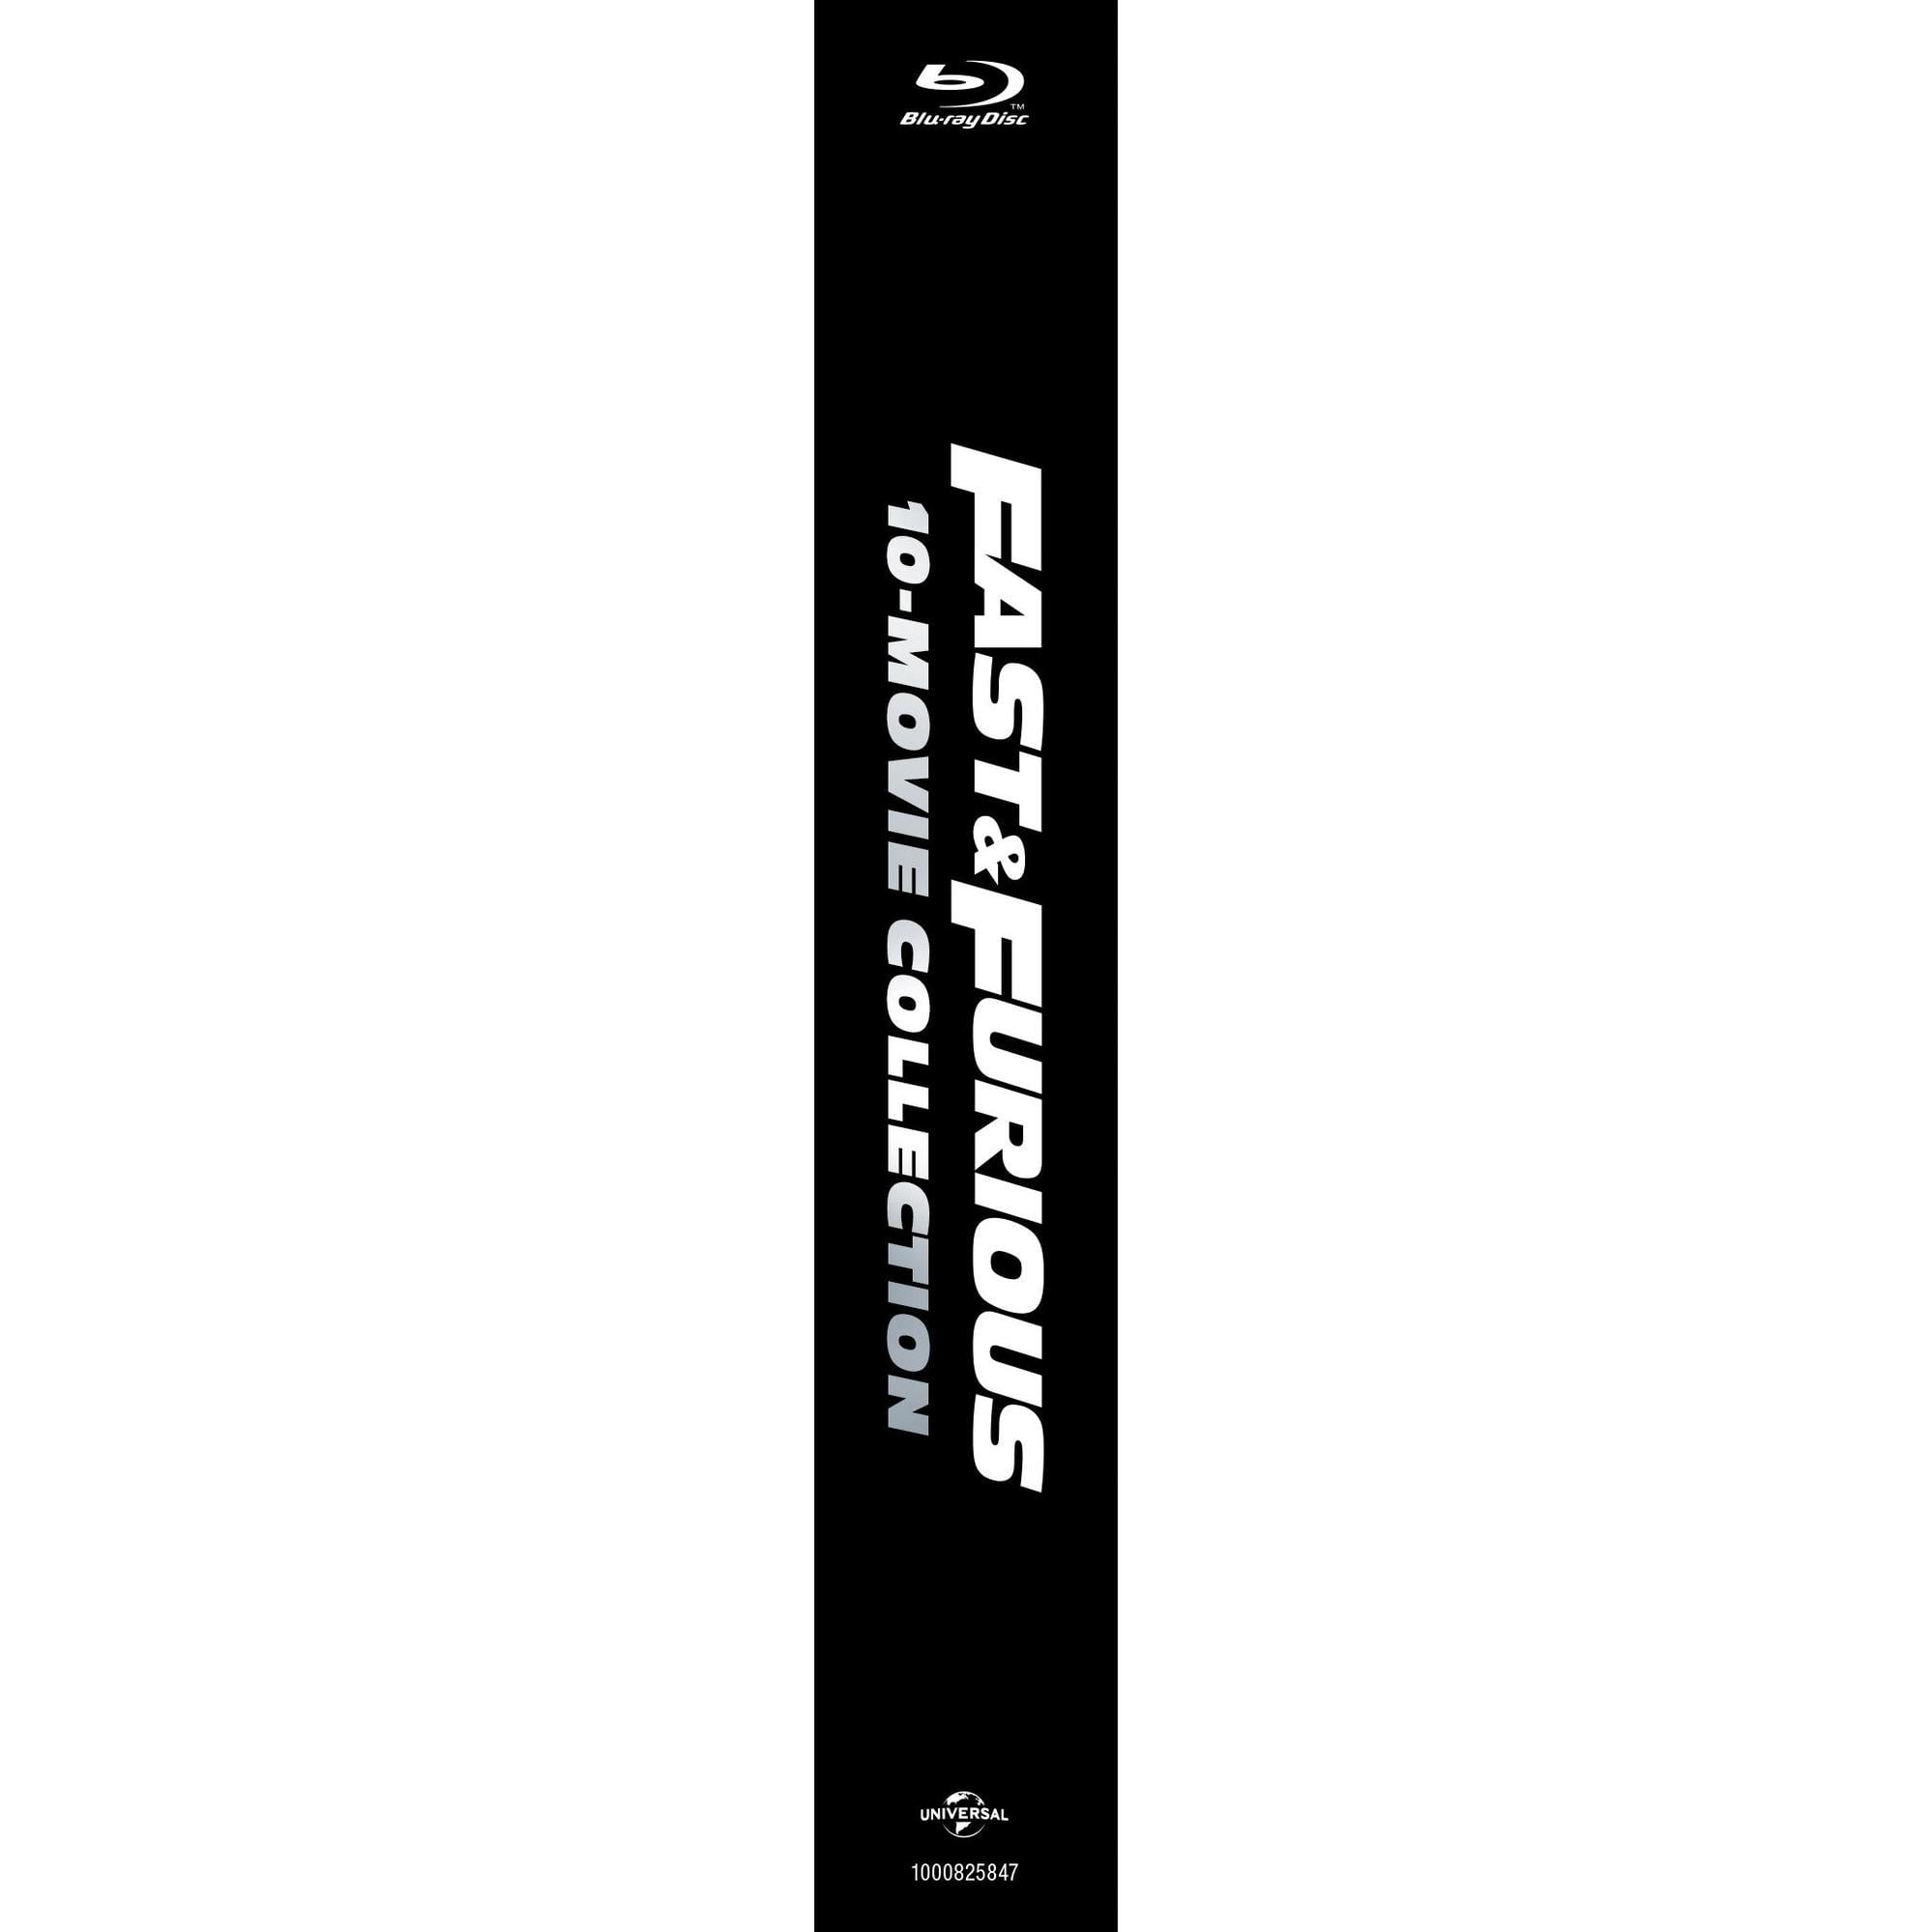 Fast and Furious 10-Movie Collection DVD Region 1 Brand New Sealed Free  Shipping